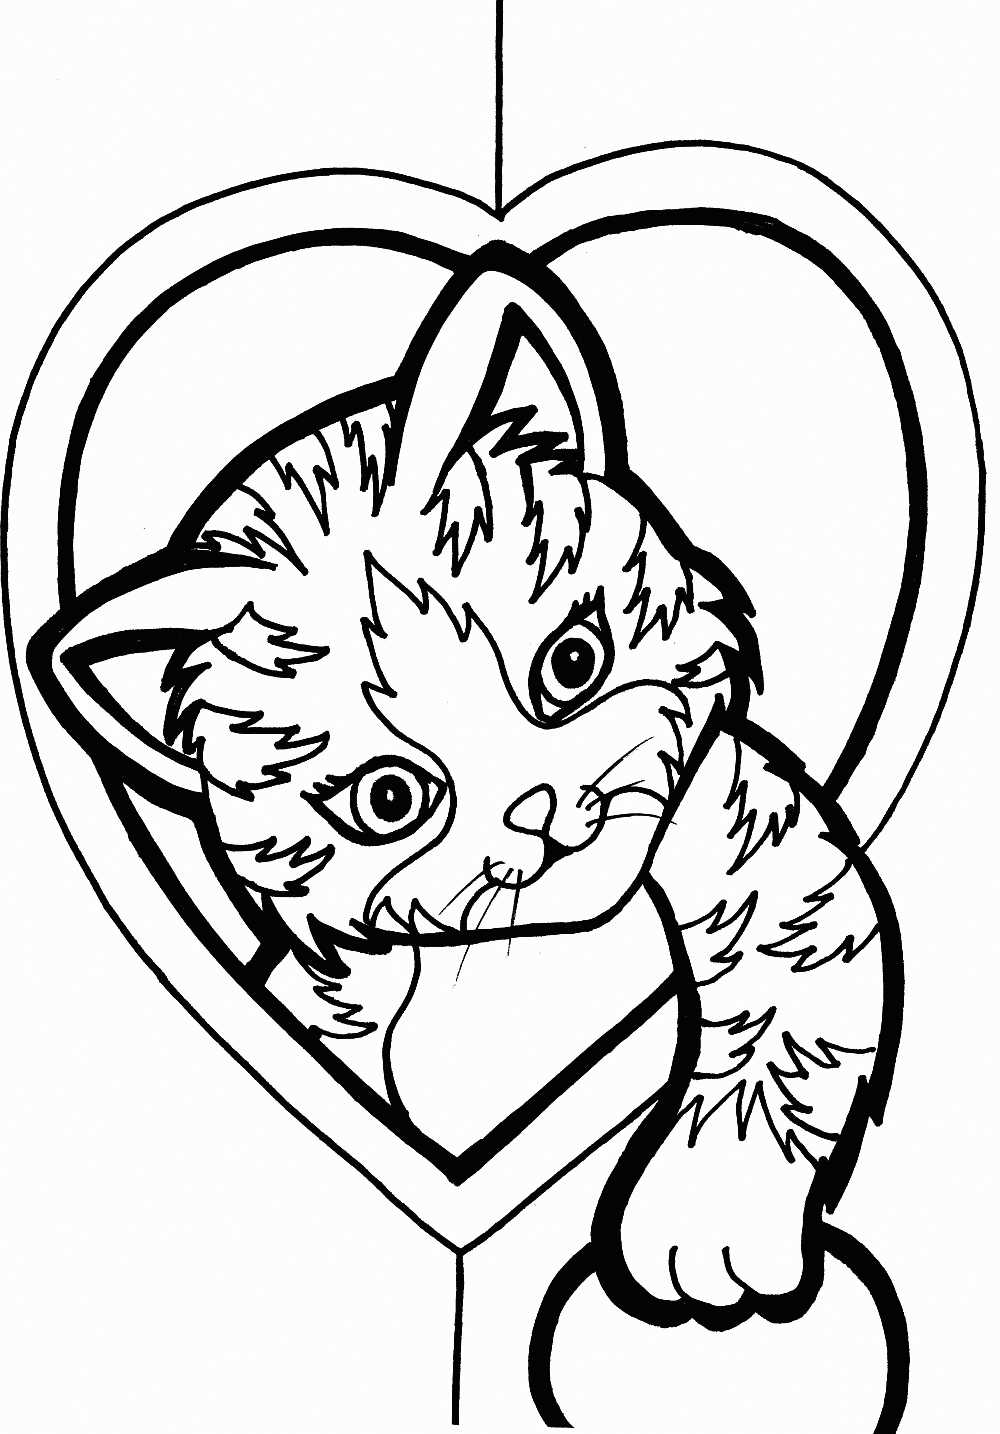 Cute Coloring Pages - Best Coloring Pages For Kids